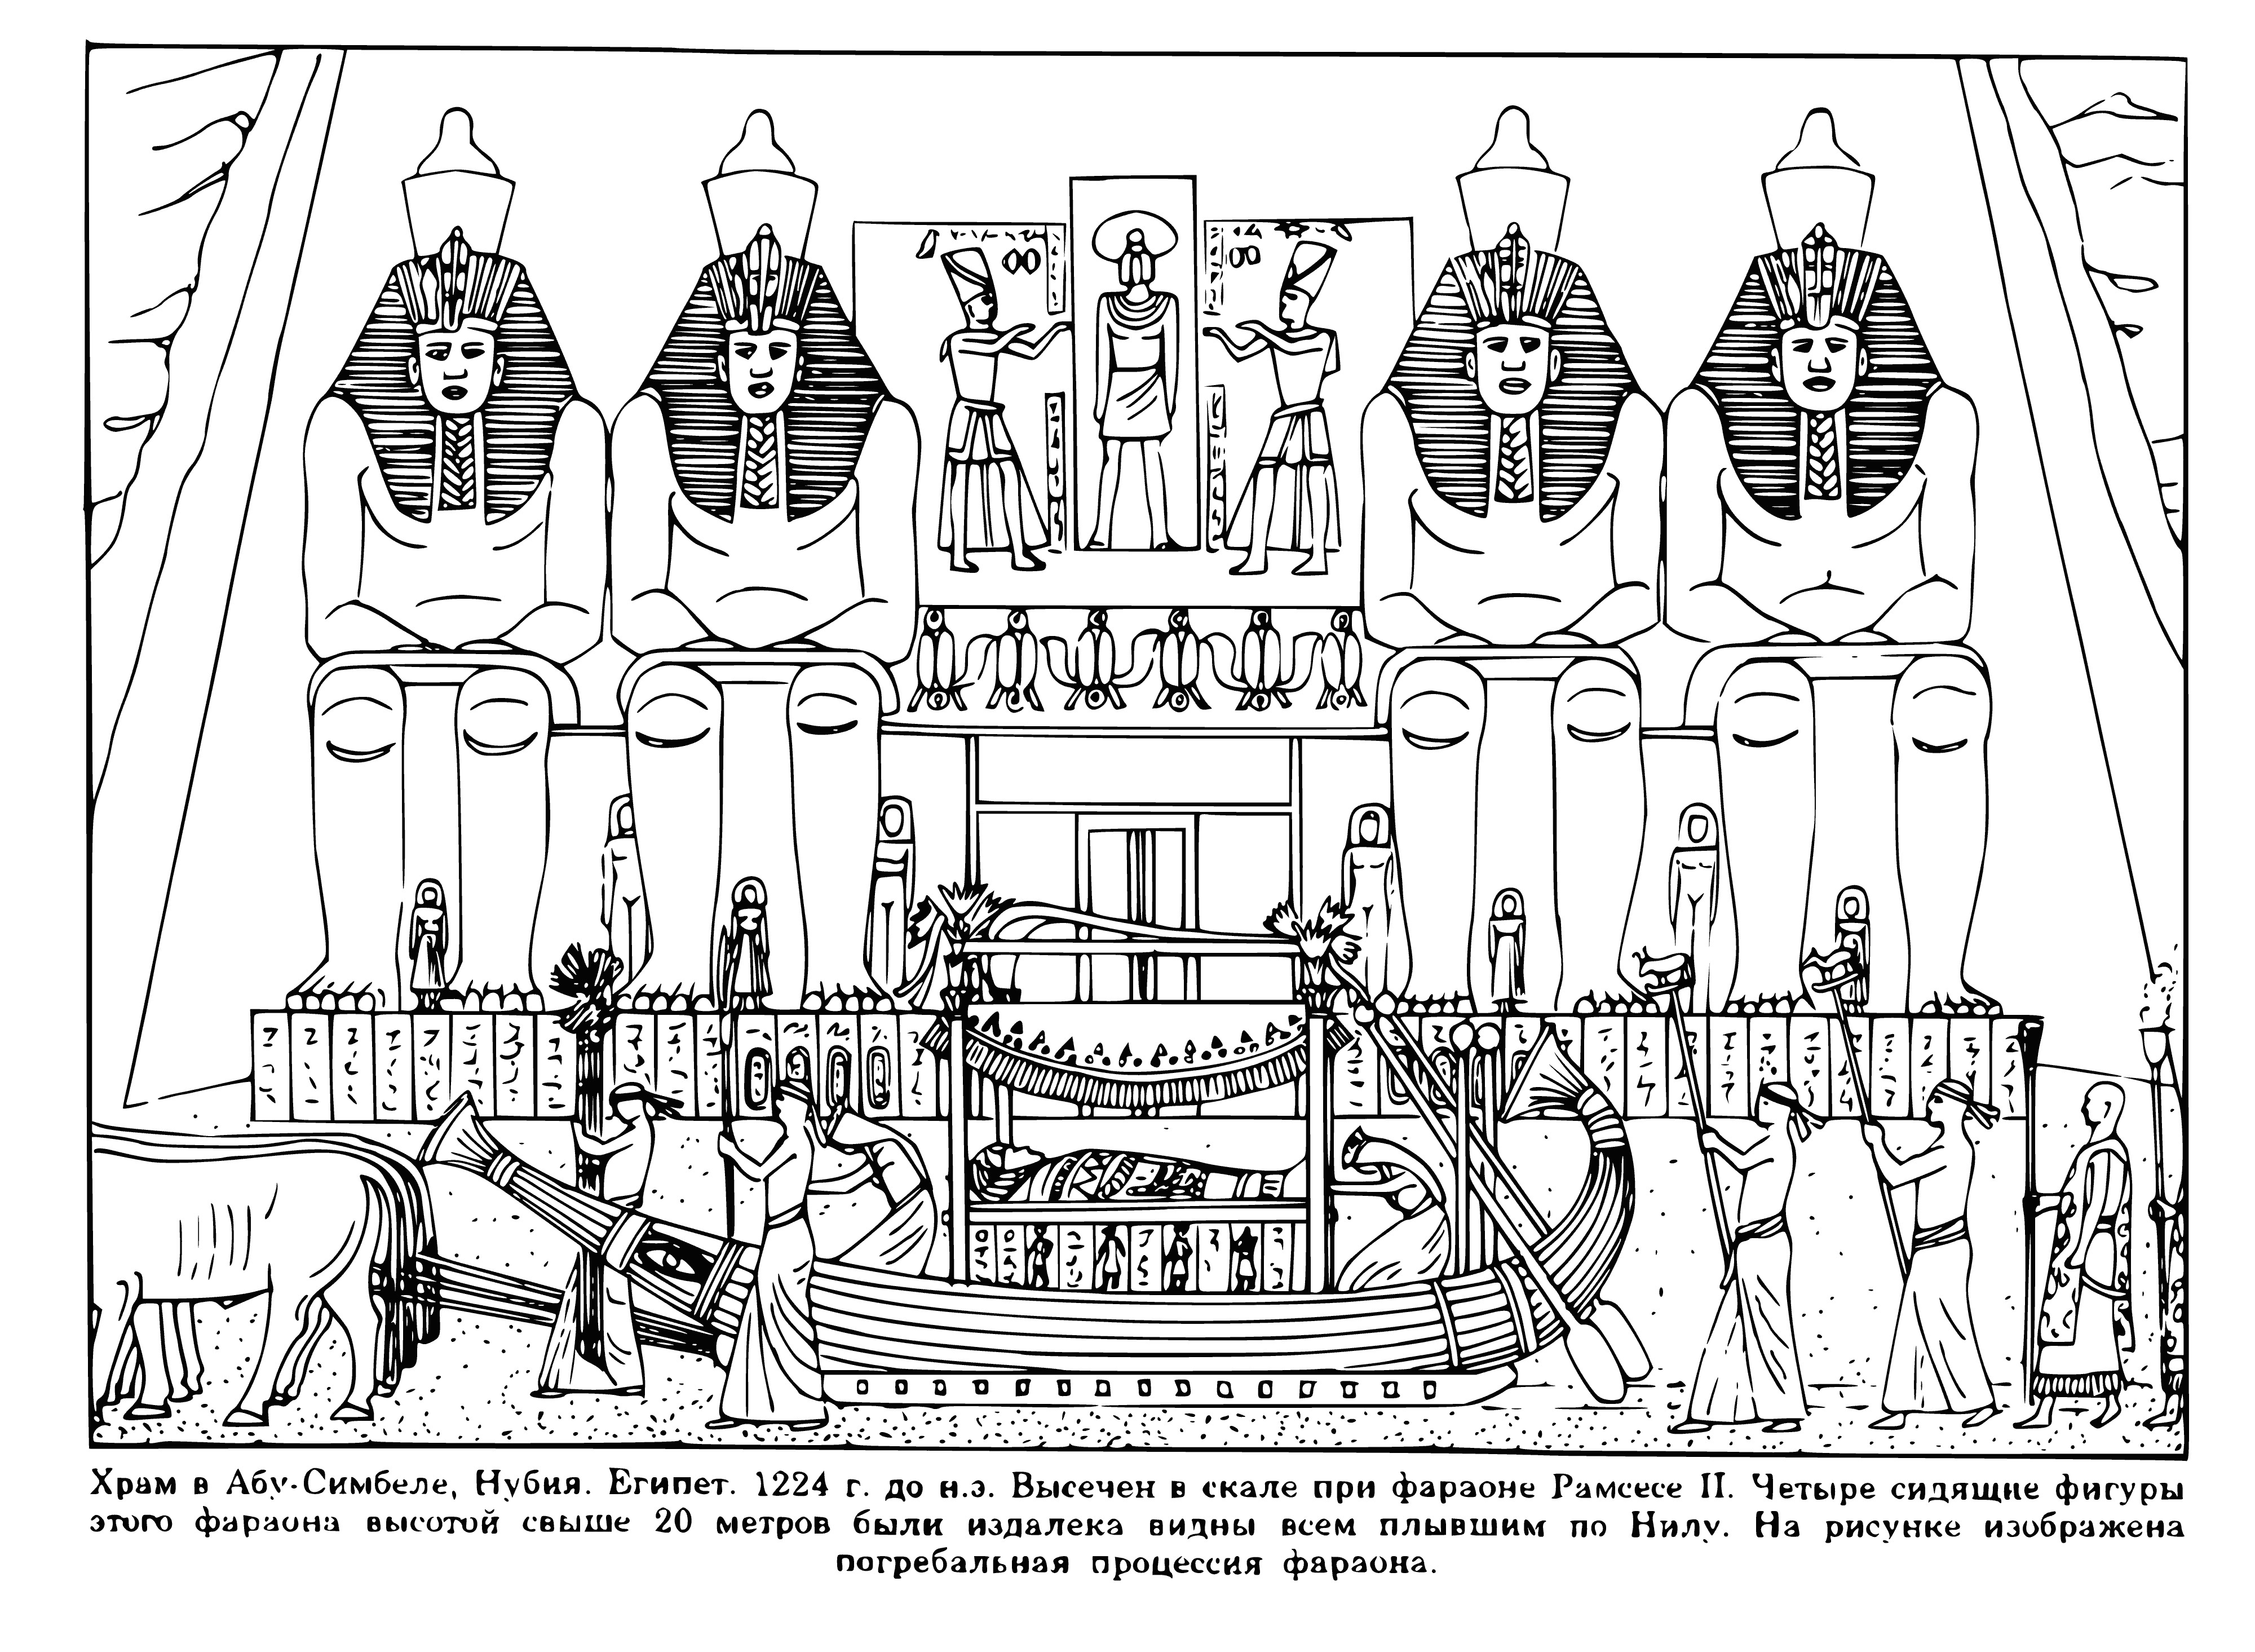 coloring page: Ancient Egyptian temple coloring page, featuring large entrance with carvings, thick stone walls, many doors/windows, and wood roof with bird carving.